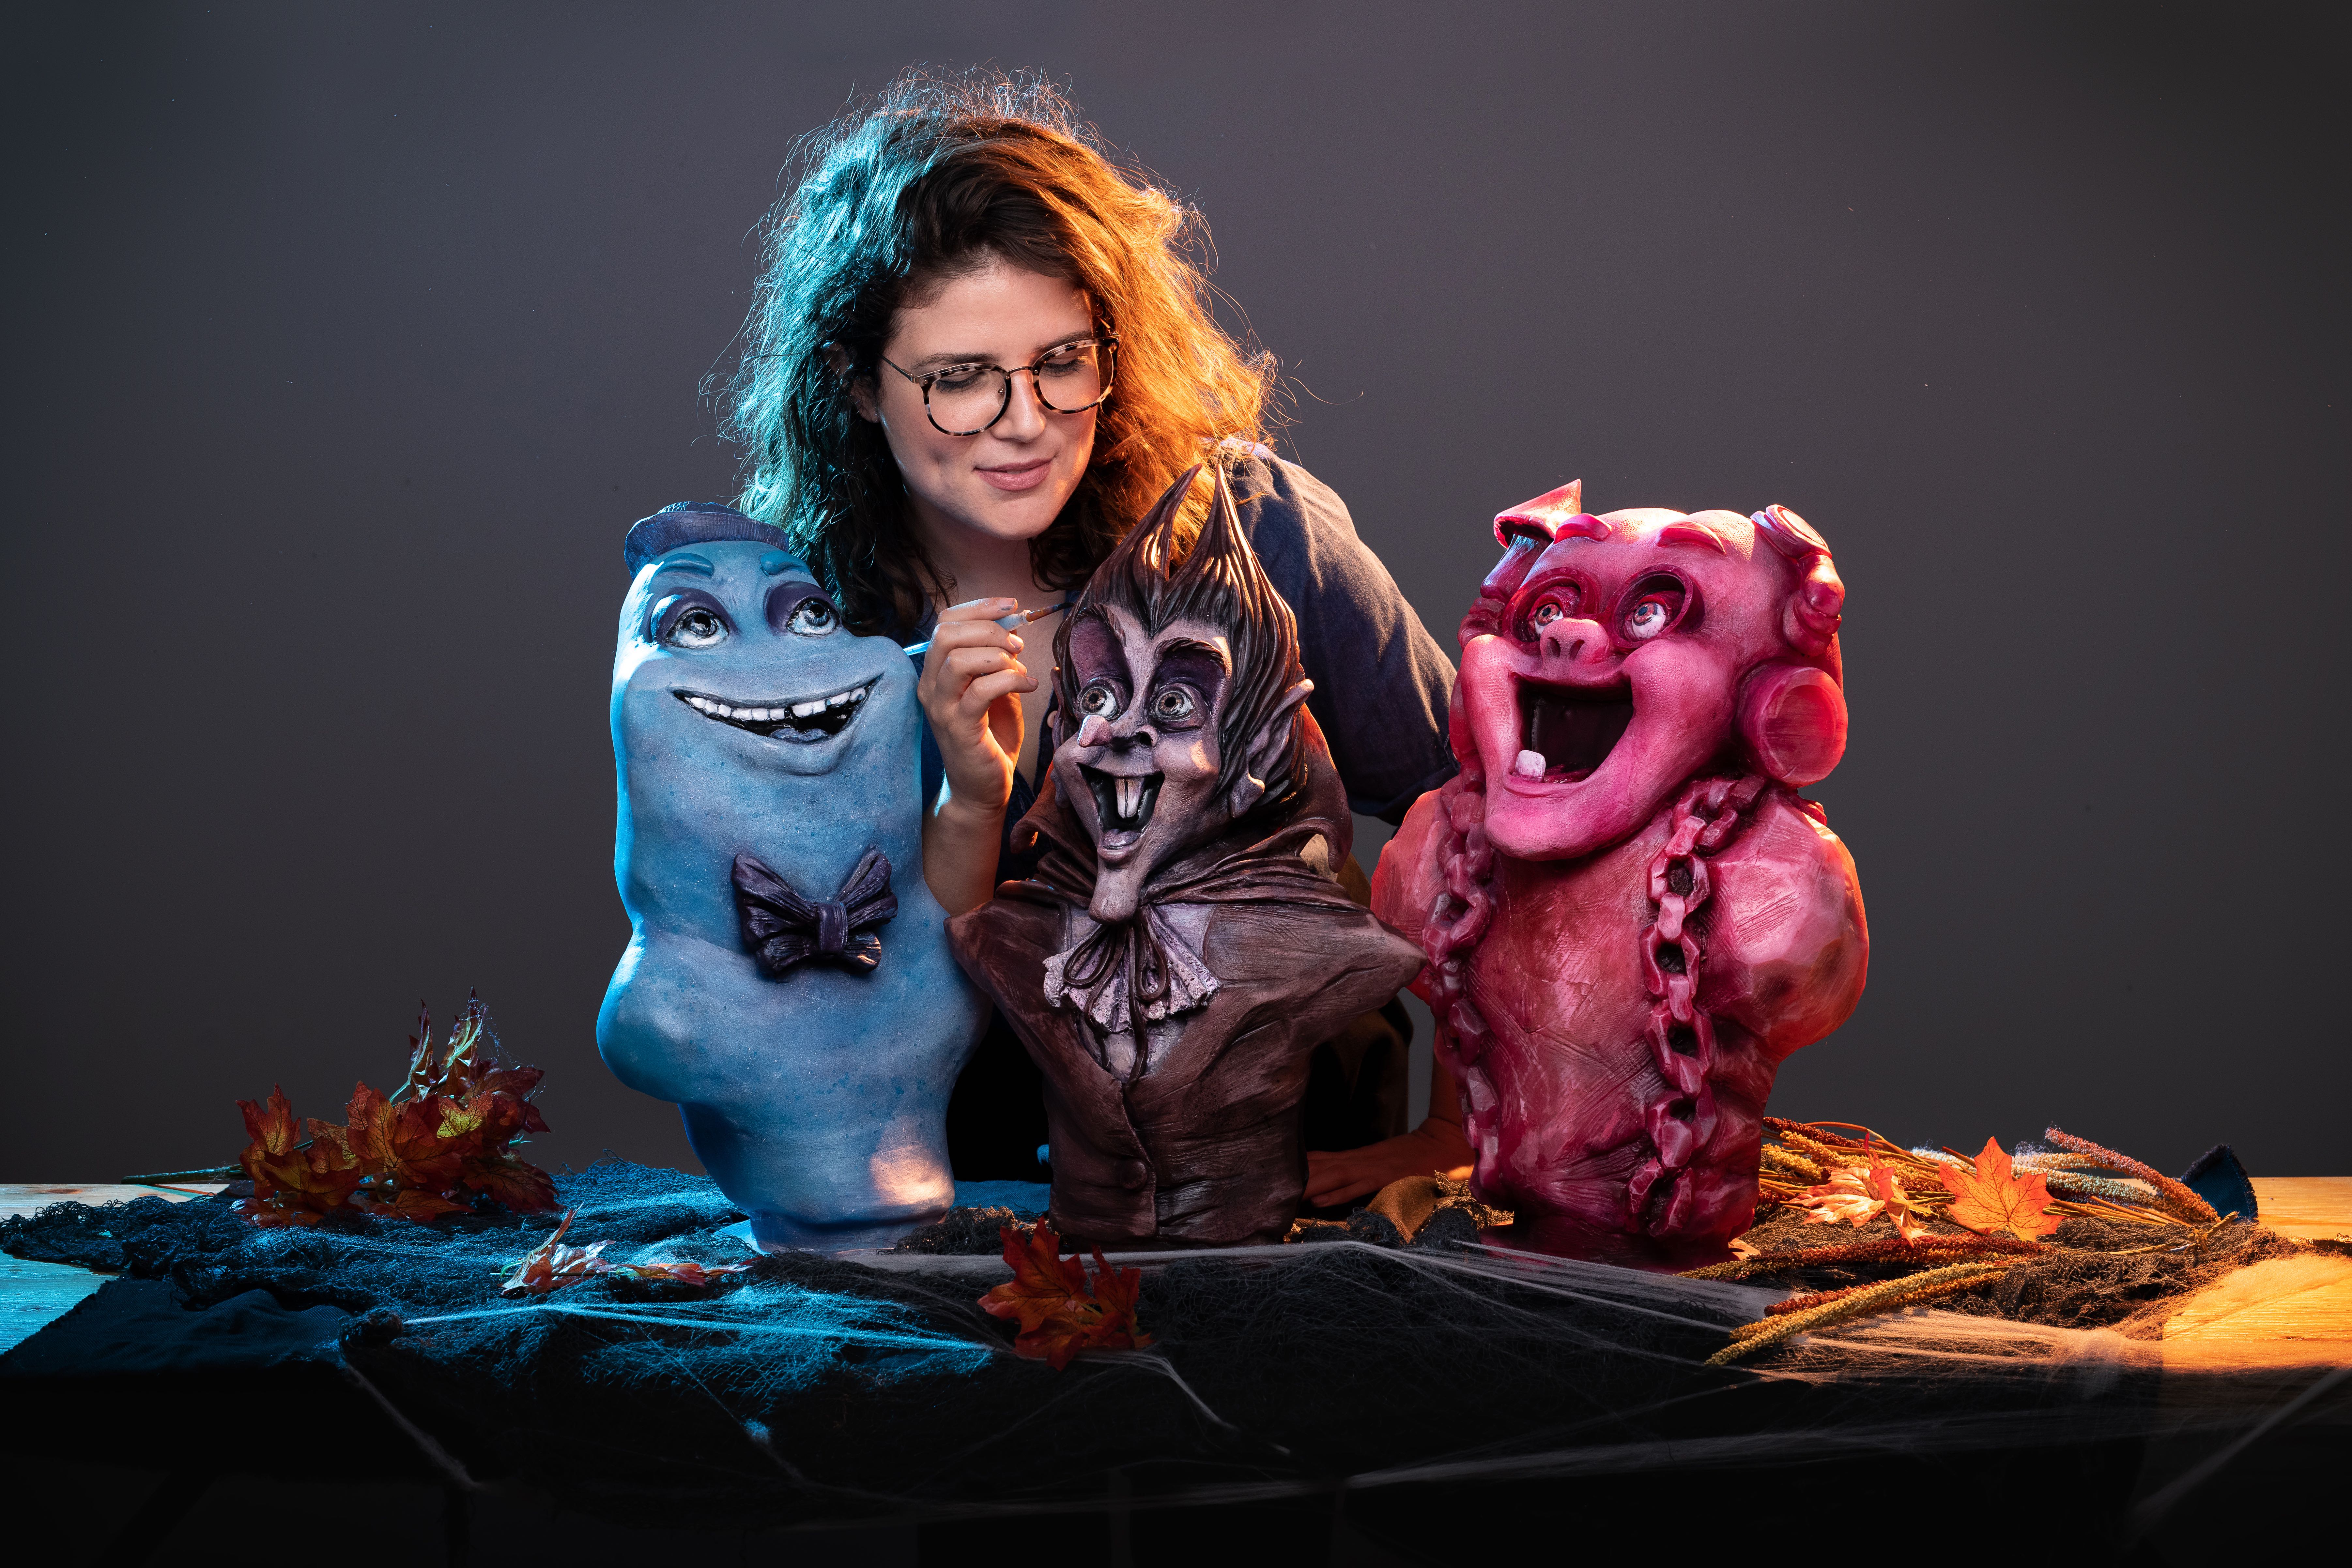 Karlee Morse adding finishing touches to Monster Cereal busts